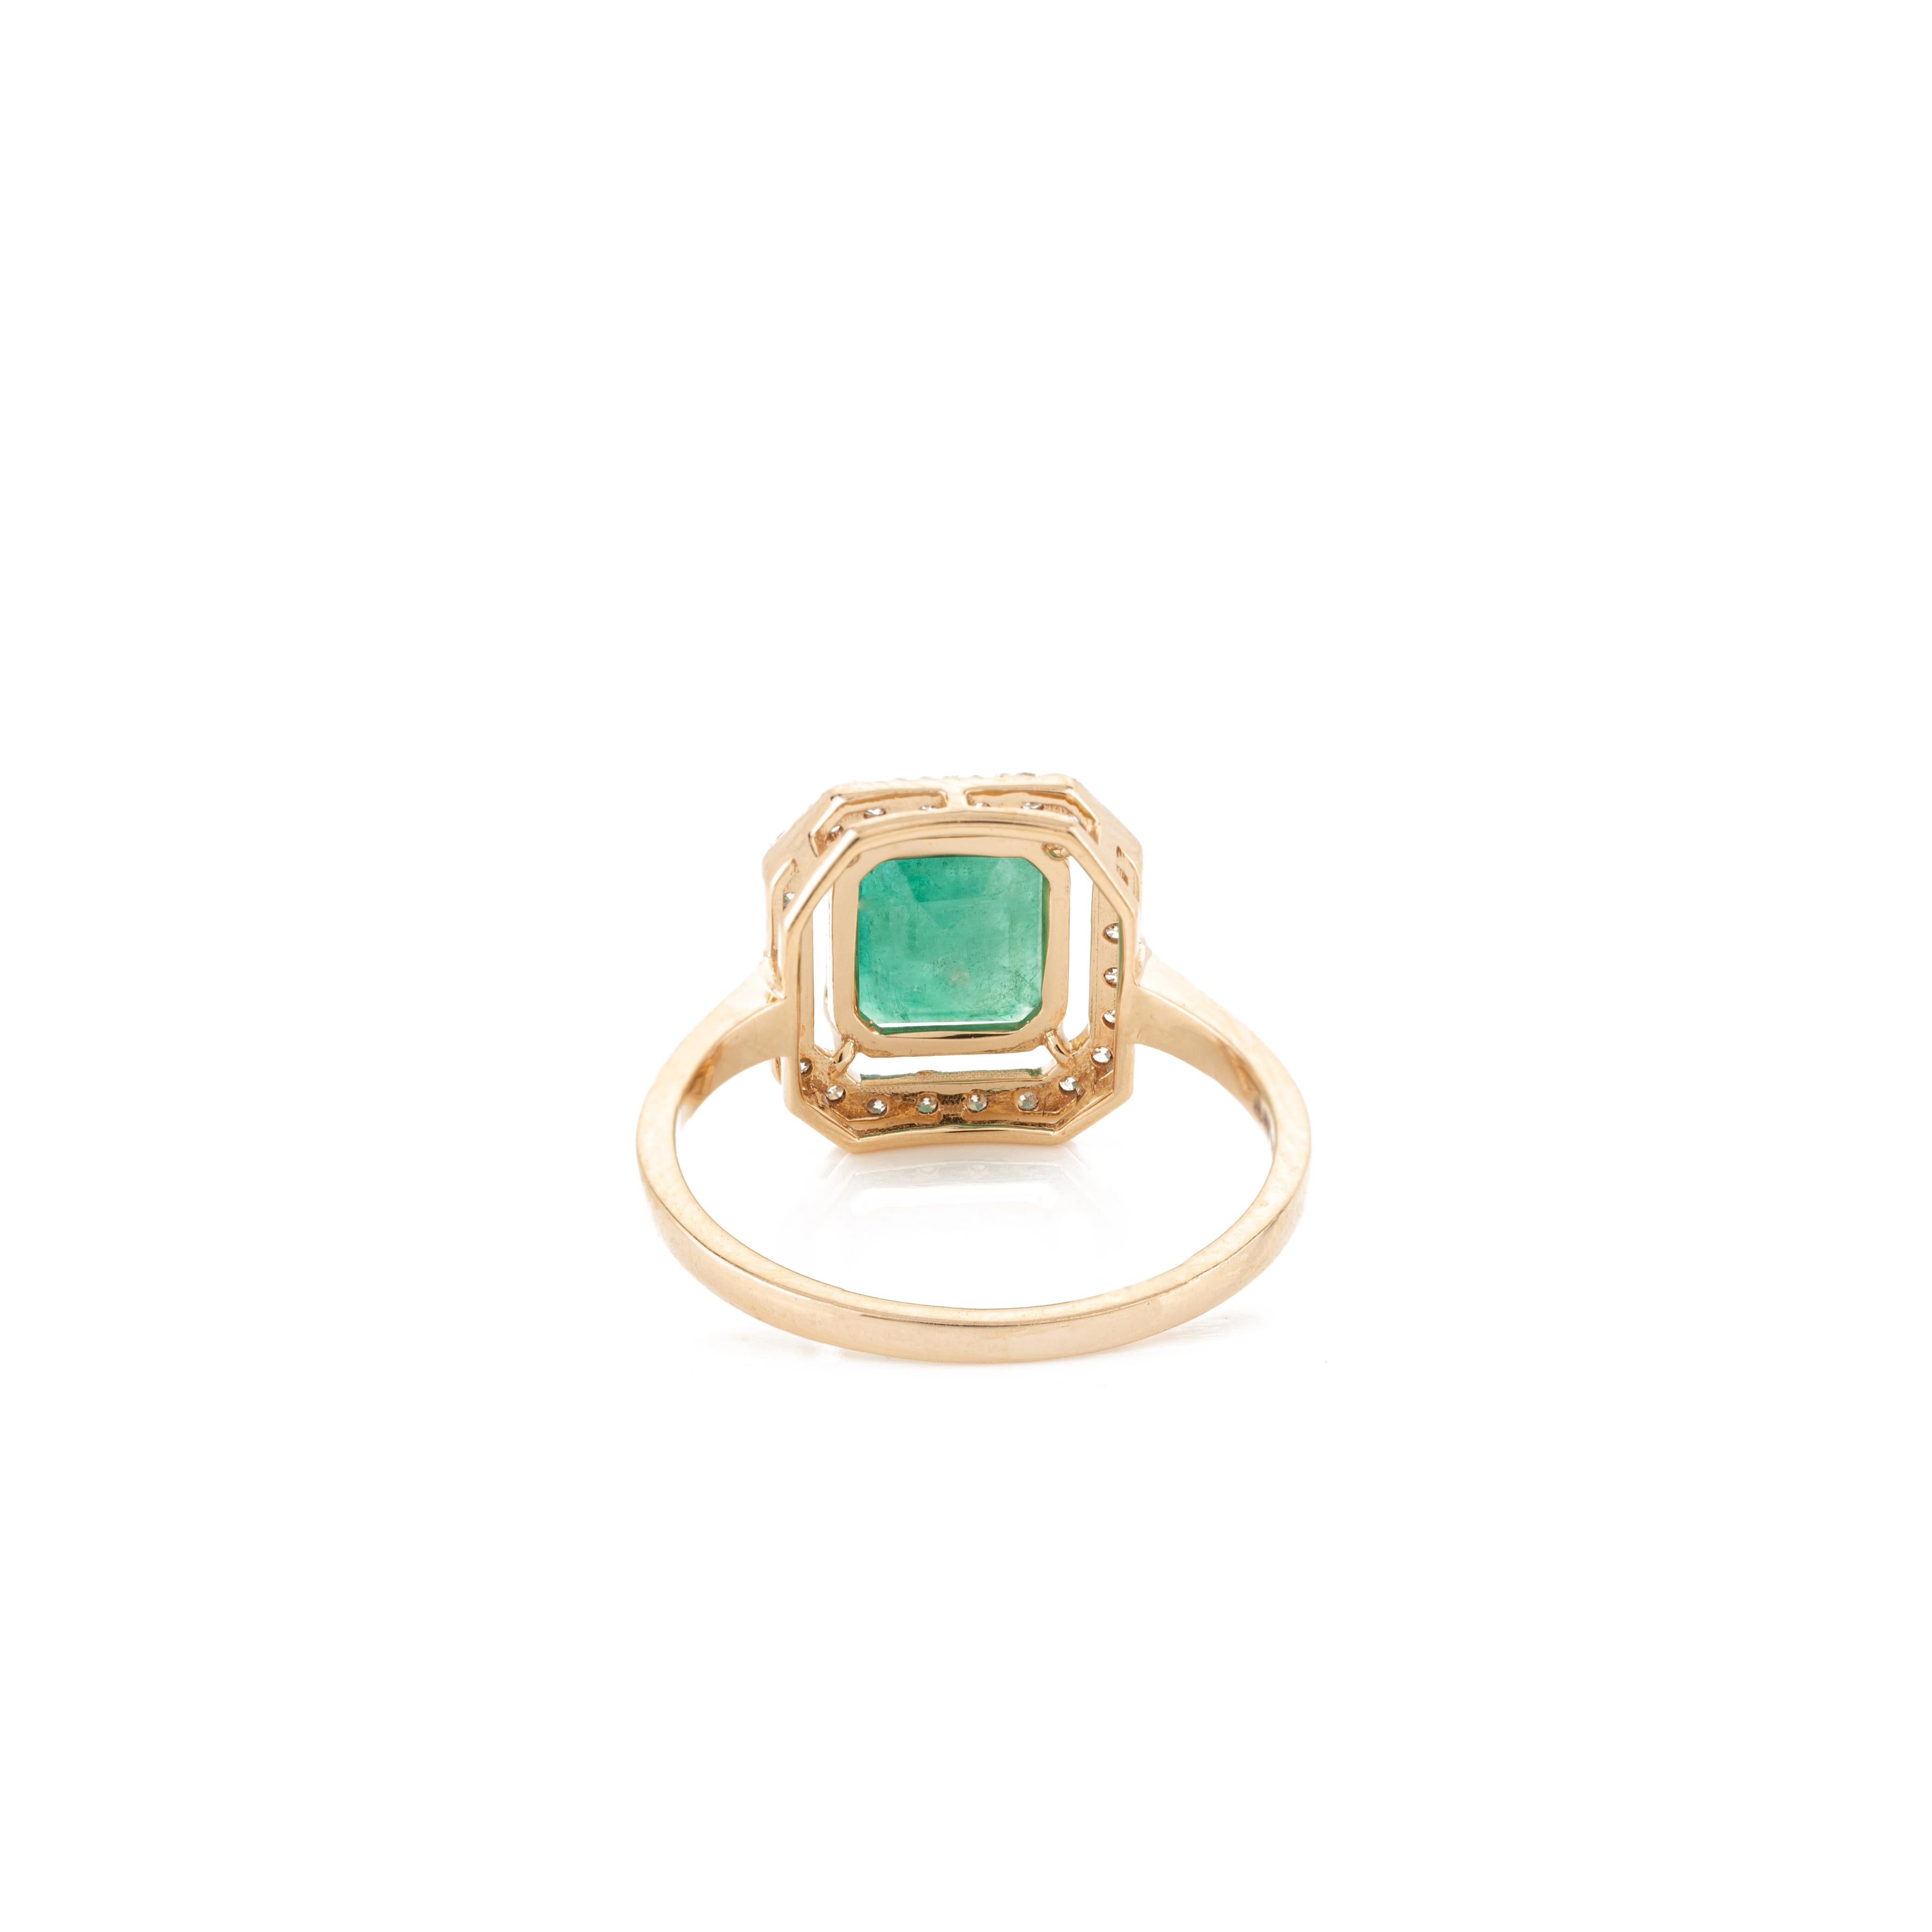 For Sale:  1.5 Carat Square Cut Emerald Diamond Halo Ring for Women in 18k Yellow Gold 7